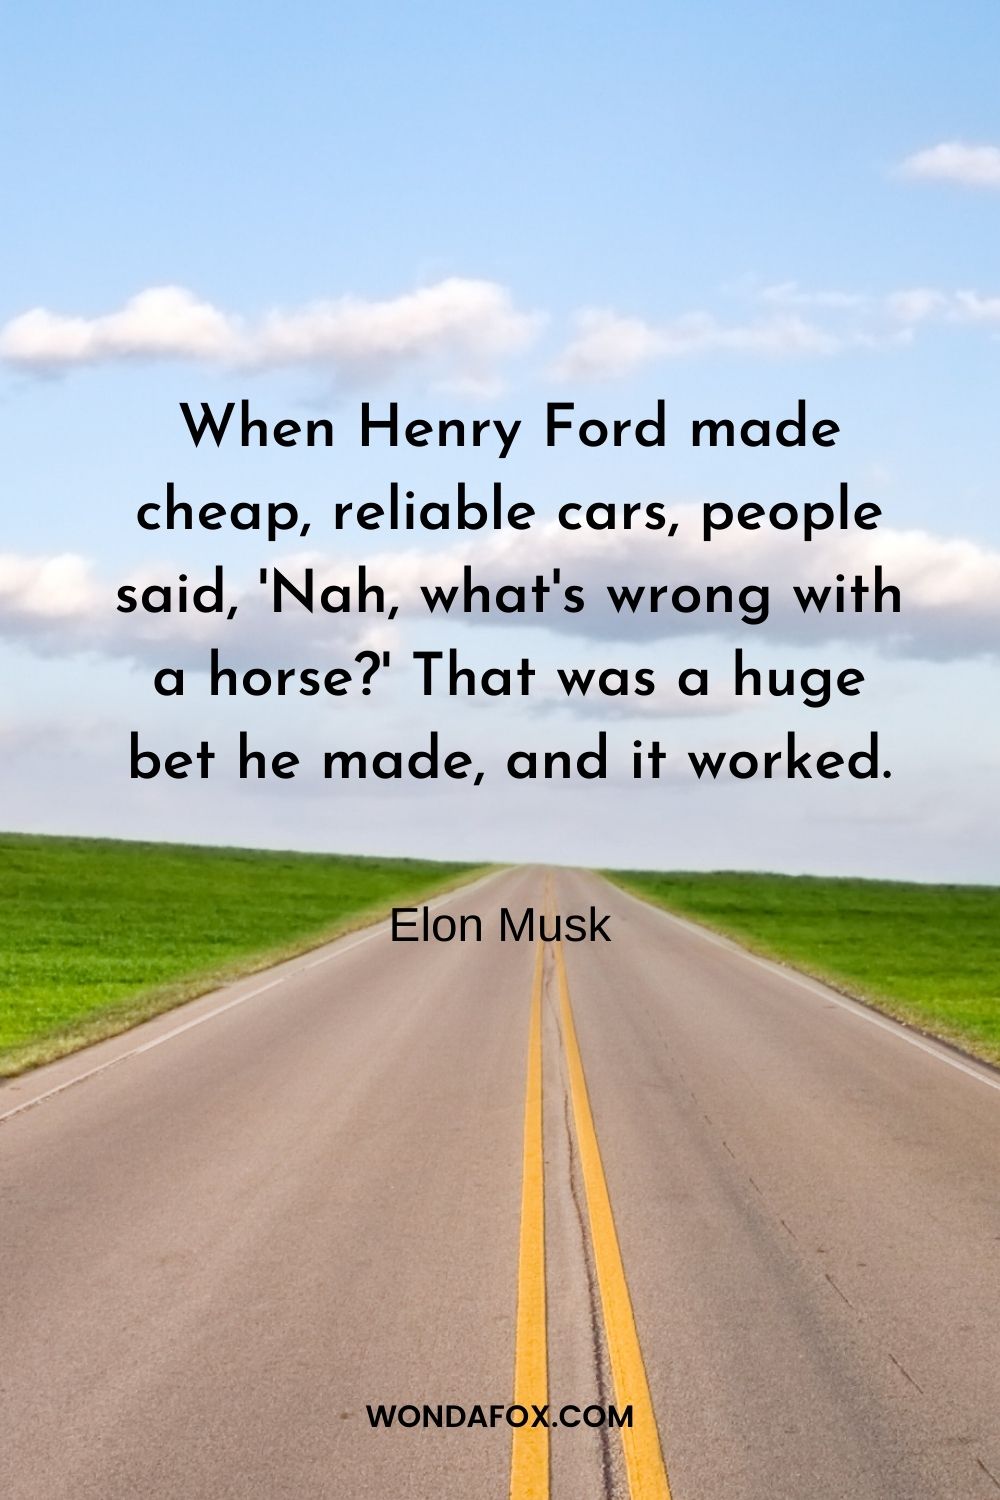 When Henry Ford made cheap, reliable cars, people said, 'Nah, what's wrong with a horse?' That was a huge bet he made, and it worked.